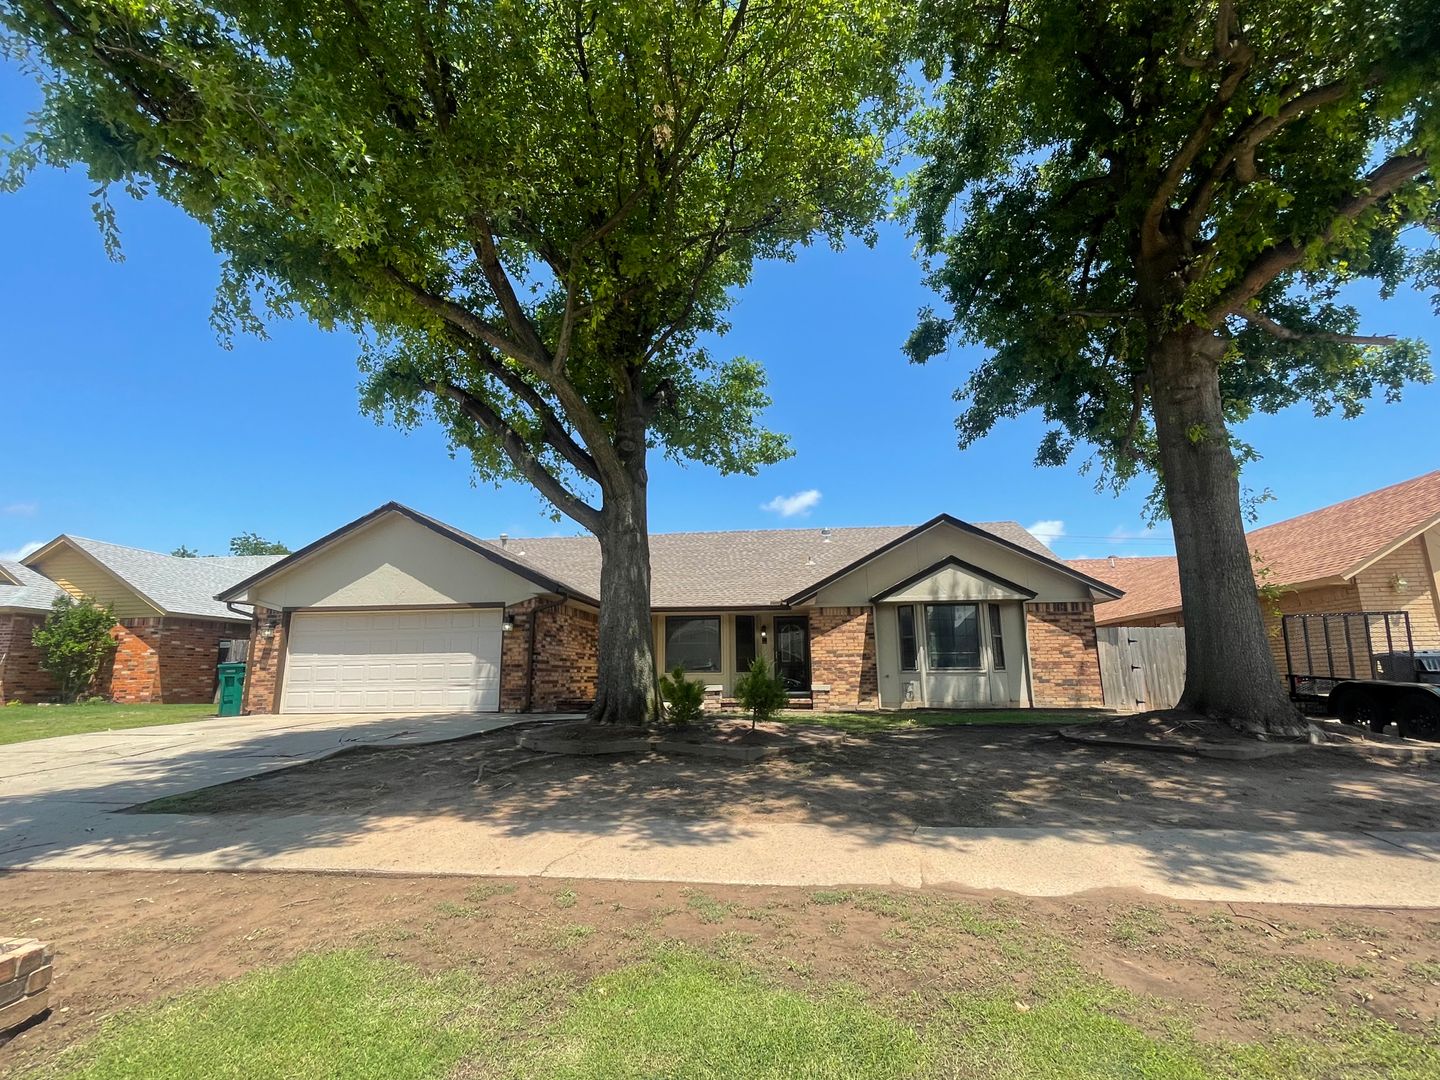 4 bed 2.5 baths in Moore Schools. 2 living areas, formal dining, storm shelter and pool!